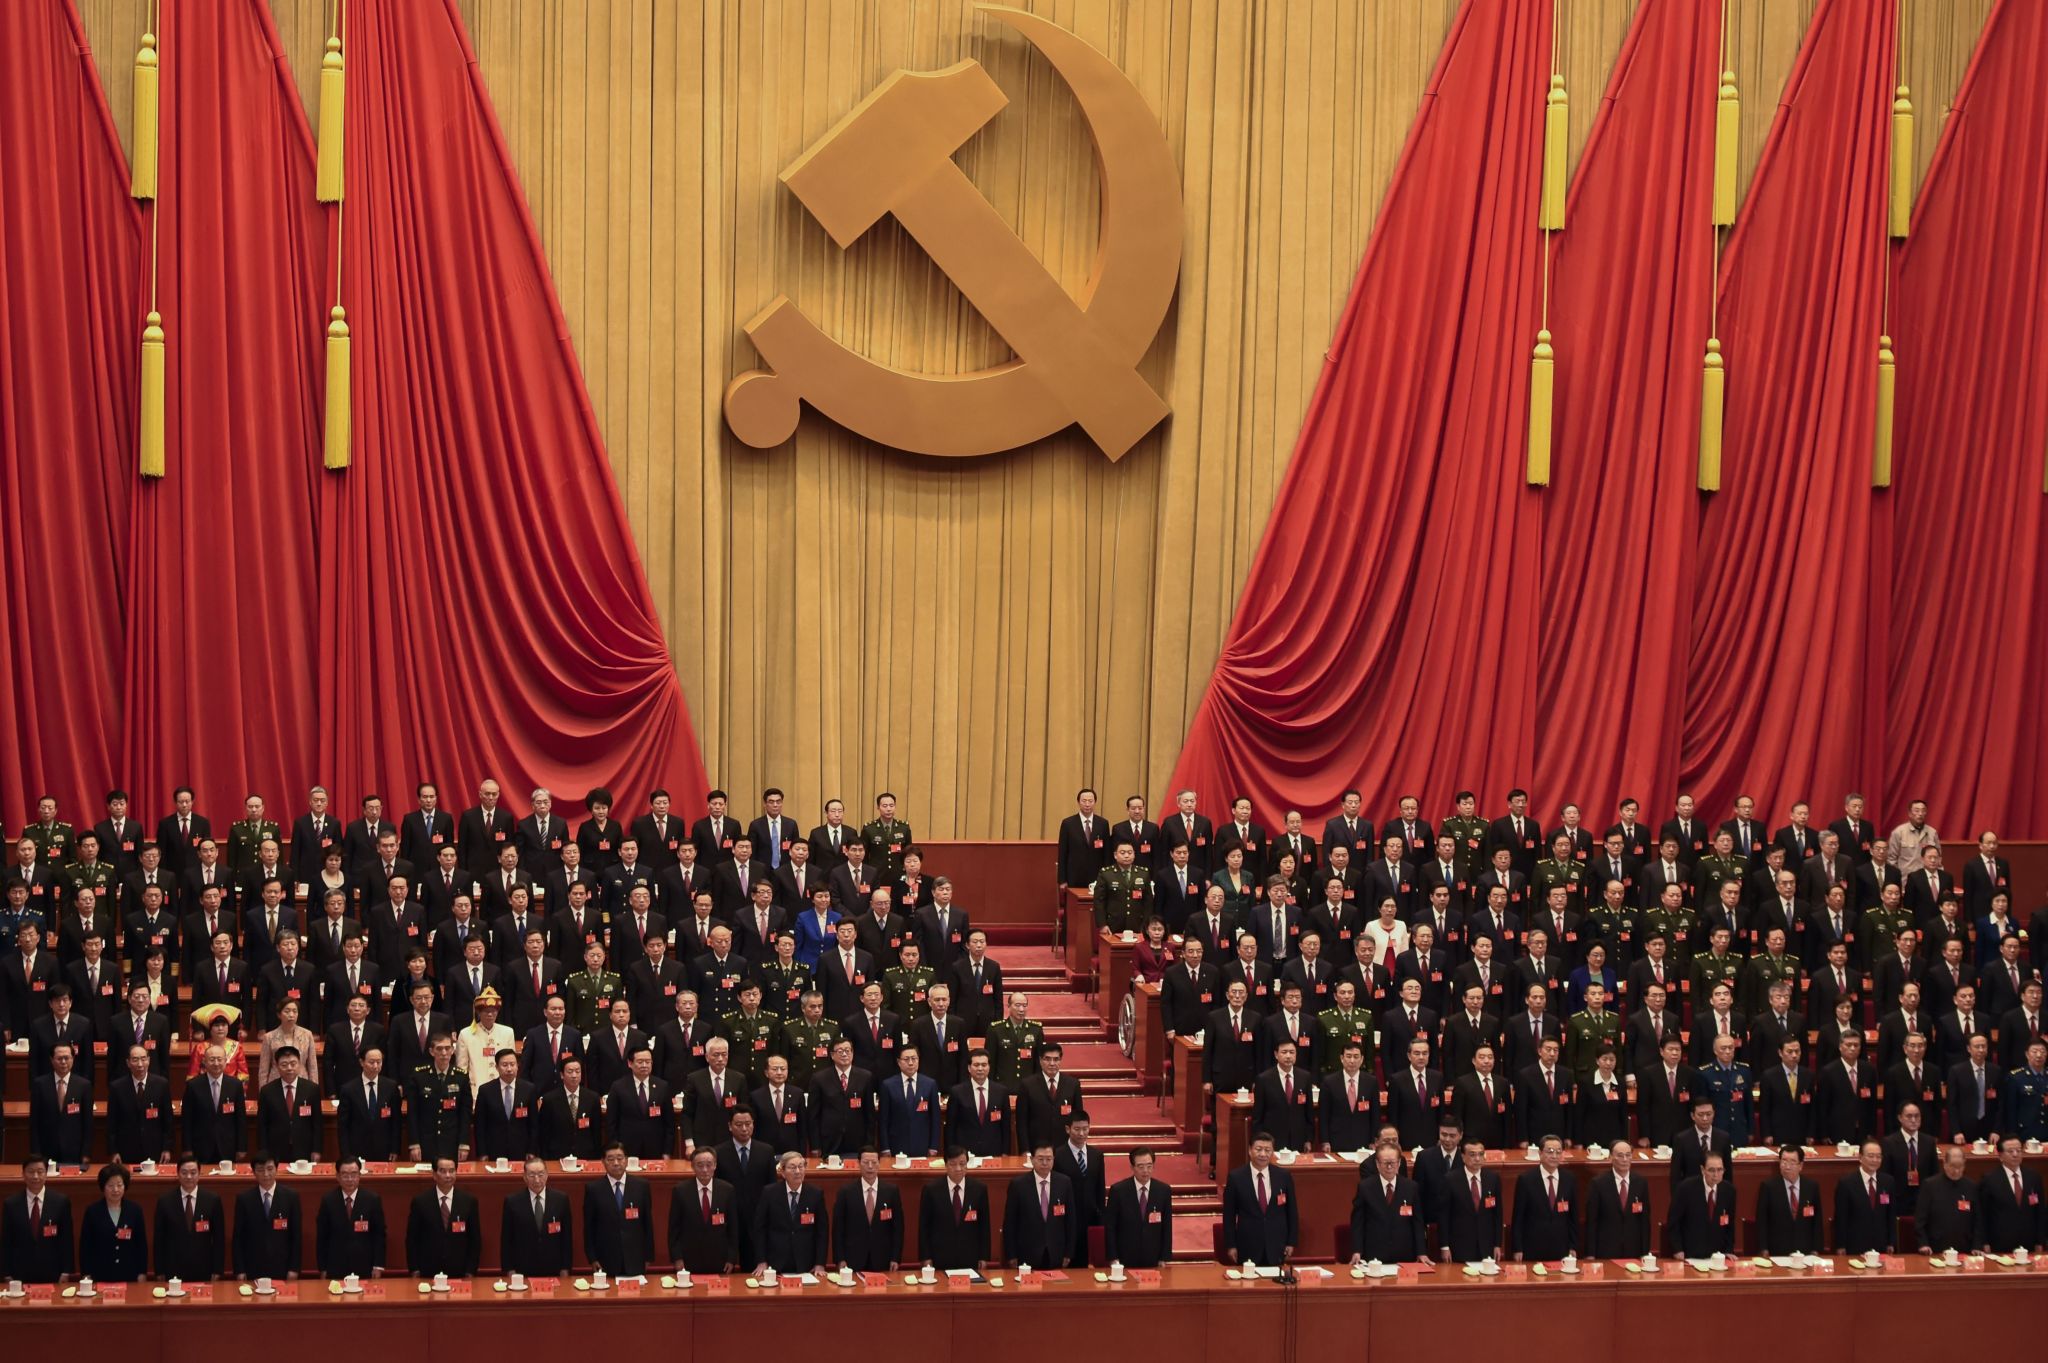 closing session of the 19th Communist Party Congress